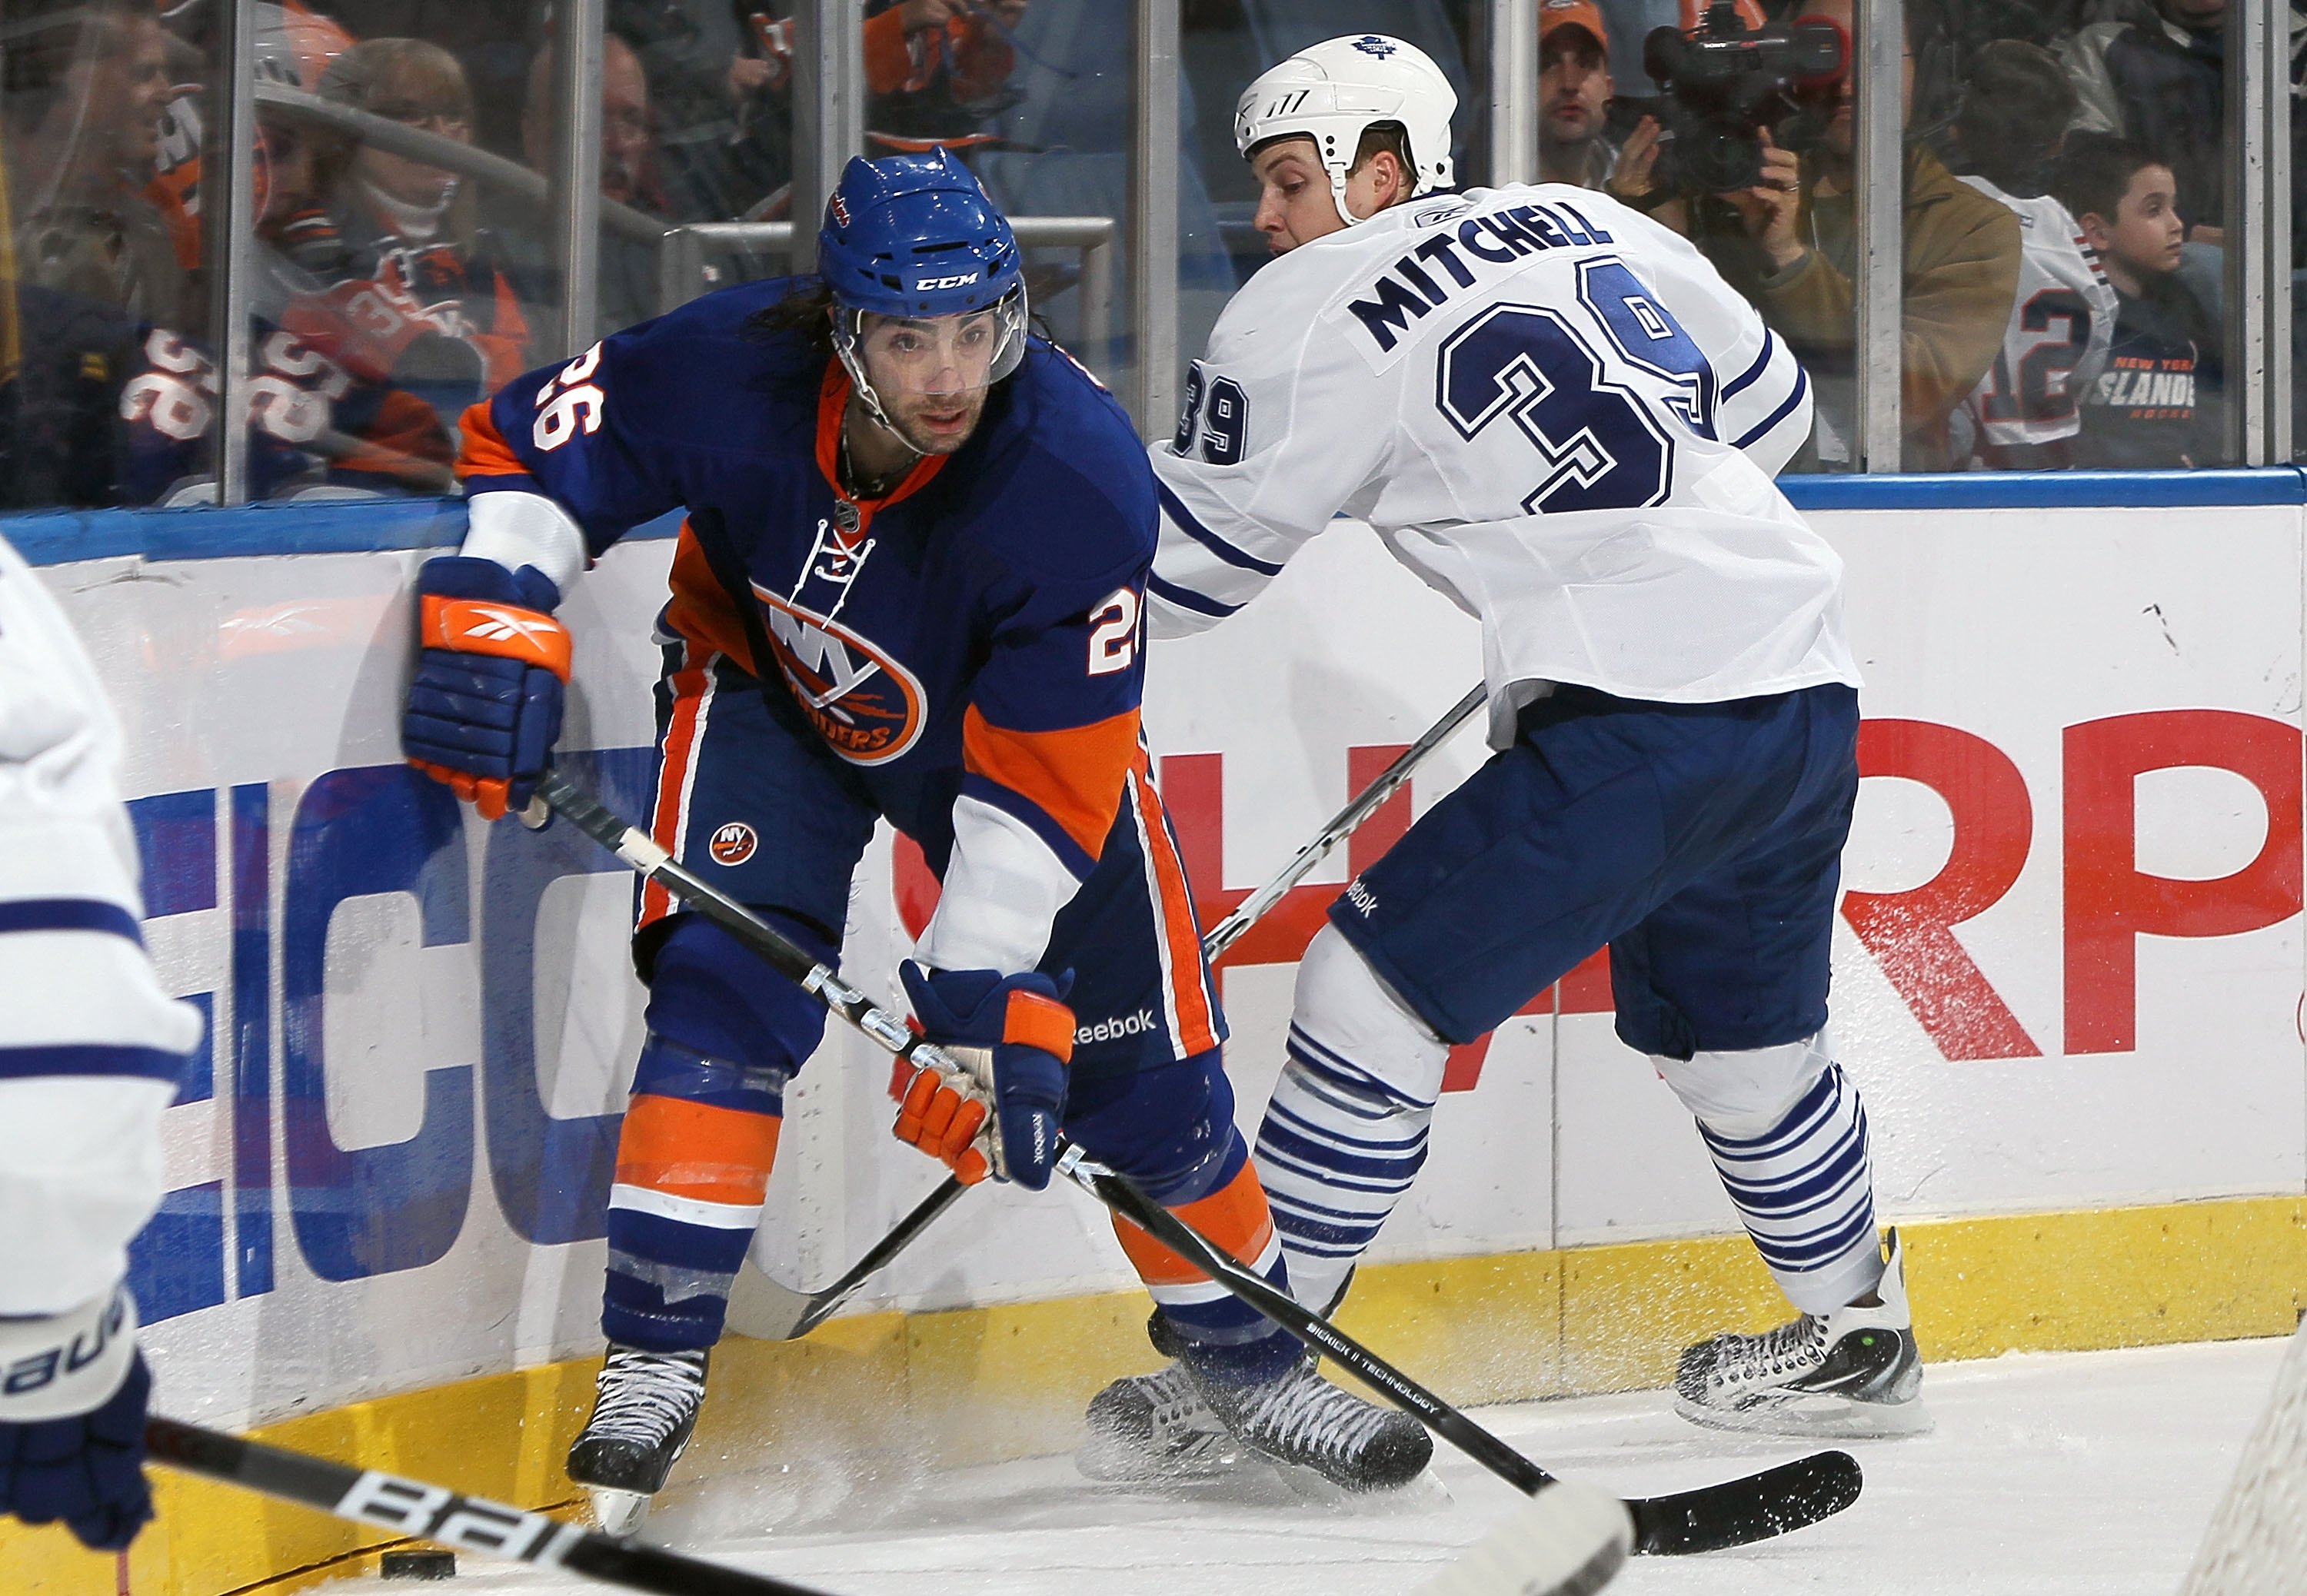 UNIONDALE, NY - MARCH 14:  Matt Moulson #26 of the New York Islanders skates against John Mitchell #39 of the Toronto Maple Leafs on March 14, 2010 at Nassau Coliseum in Uniondale, New York. The Isles defeated the Leafs 4-1.  (Photo by Jim McIsaac/Getty I